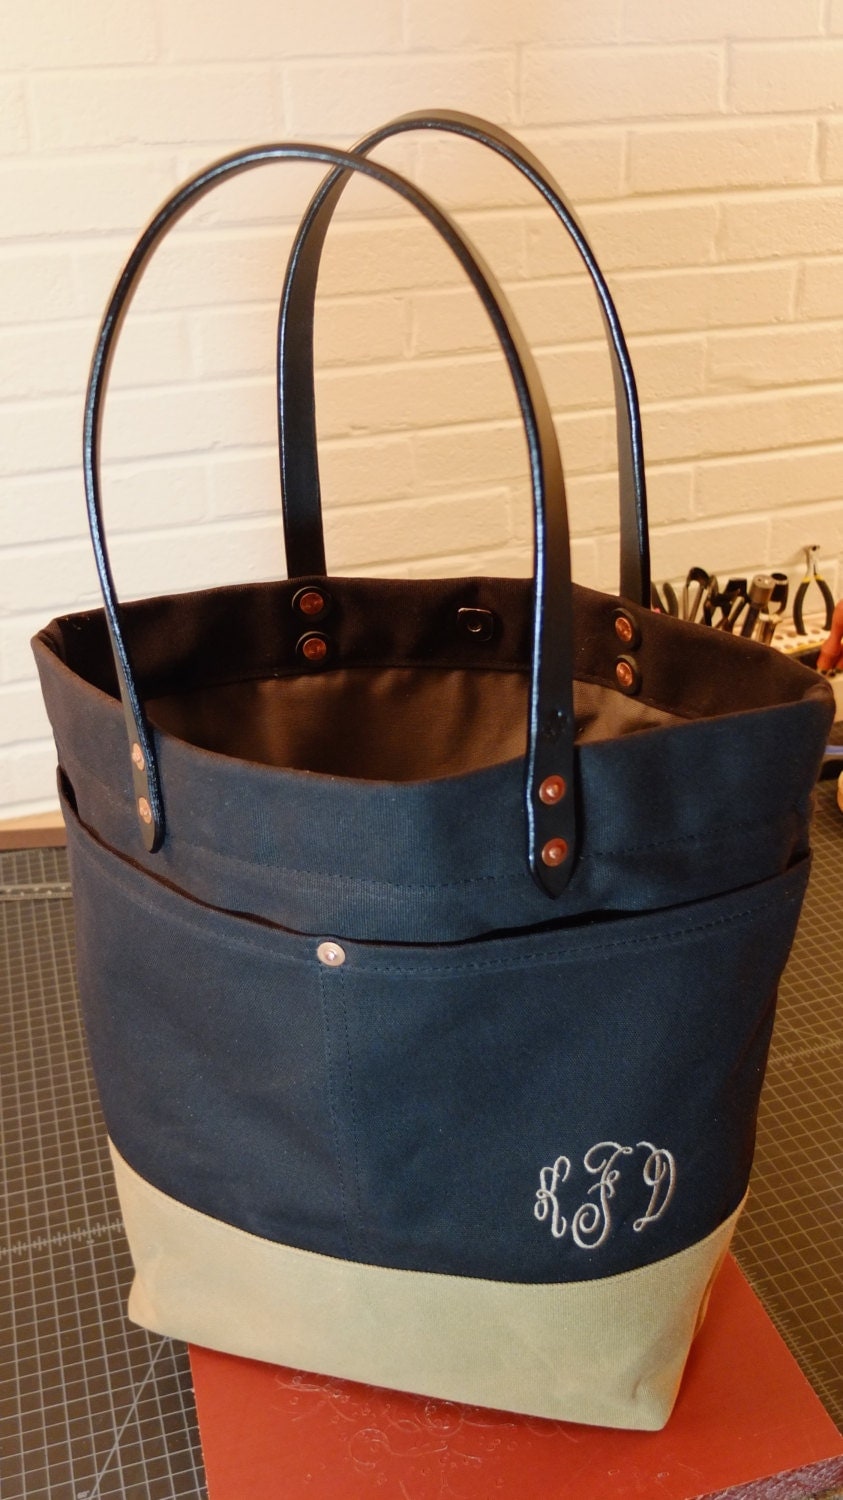 Waxed Canvas Tote Bag with Leather Handles Large Black & Tan